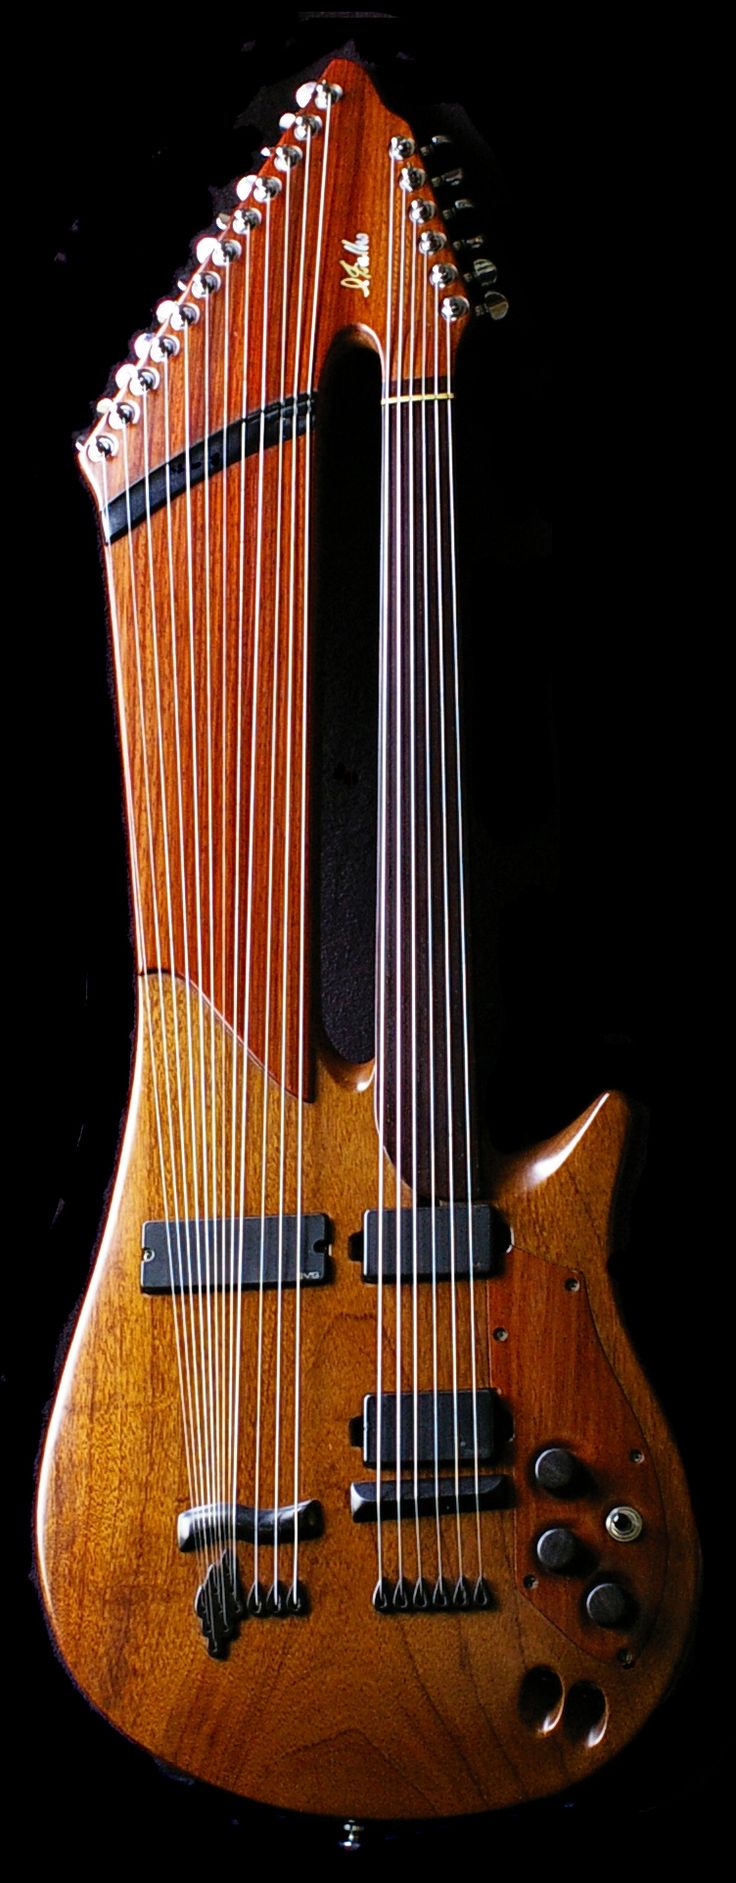 electric harp guitar... like the string-end holders and the inset wooden control...